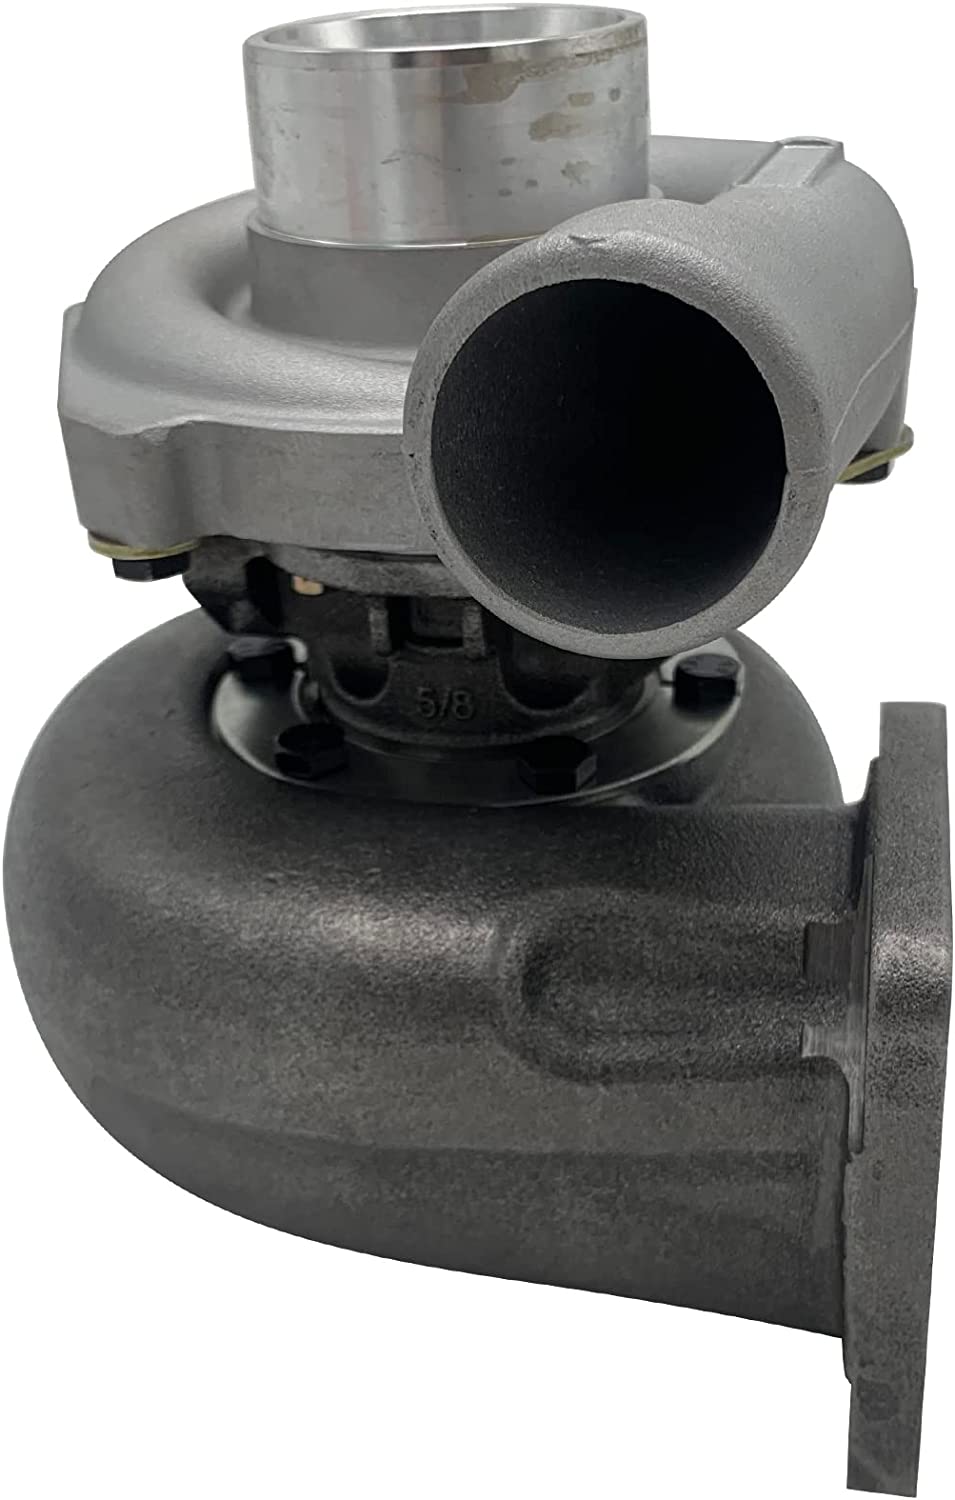 Seapple Turbocharger 4N6859 4N-6859 Compatible with Caterpillar D4E 950 930 518 Skidder 3304 - image 3 of 6